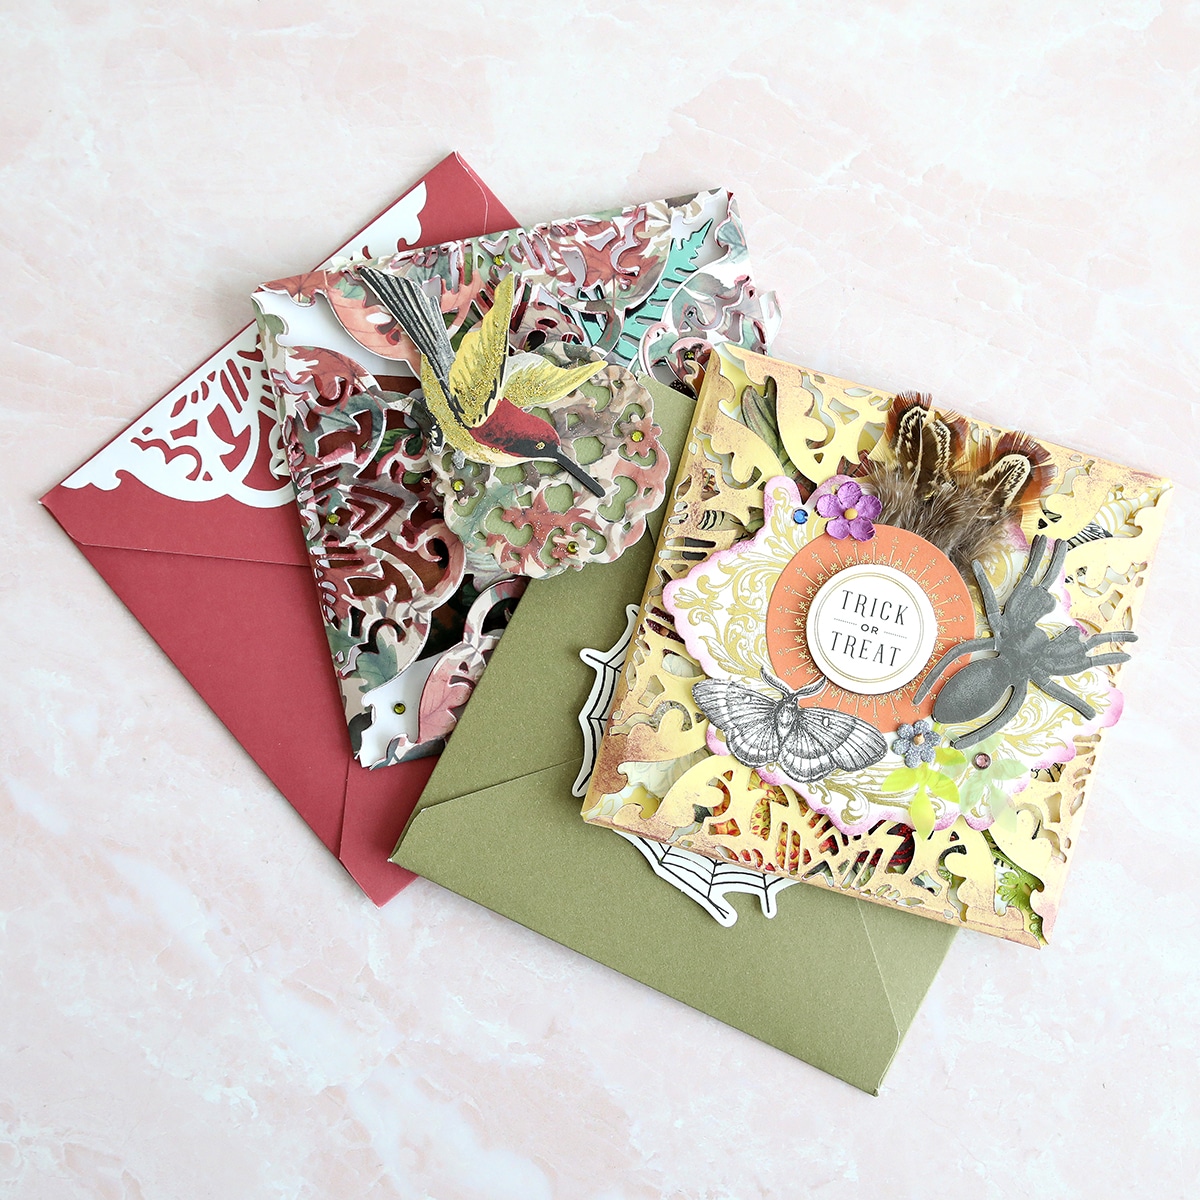 Three envelopes with different designs on them.